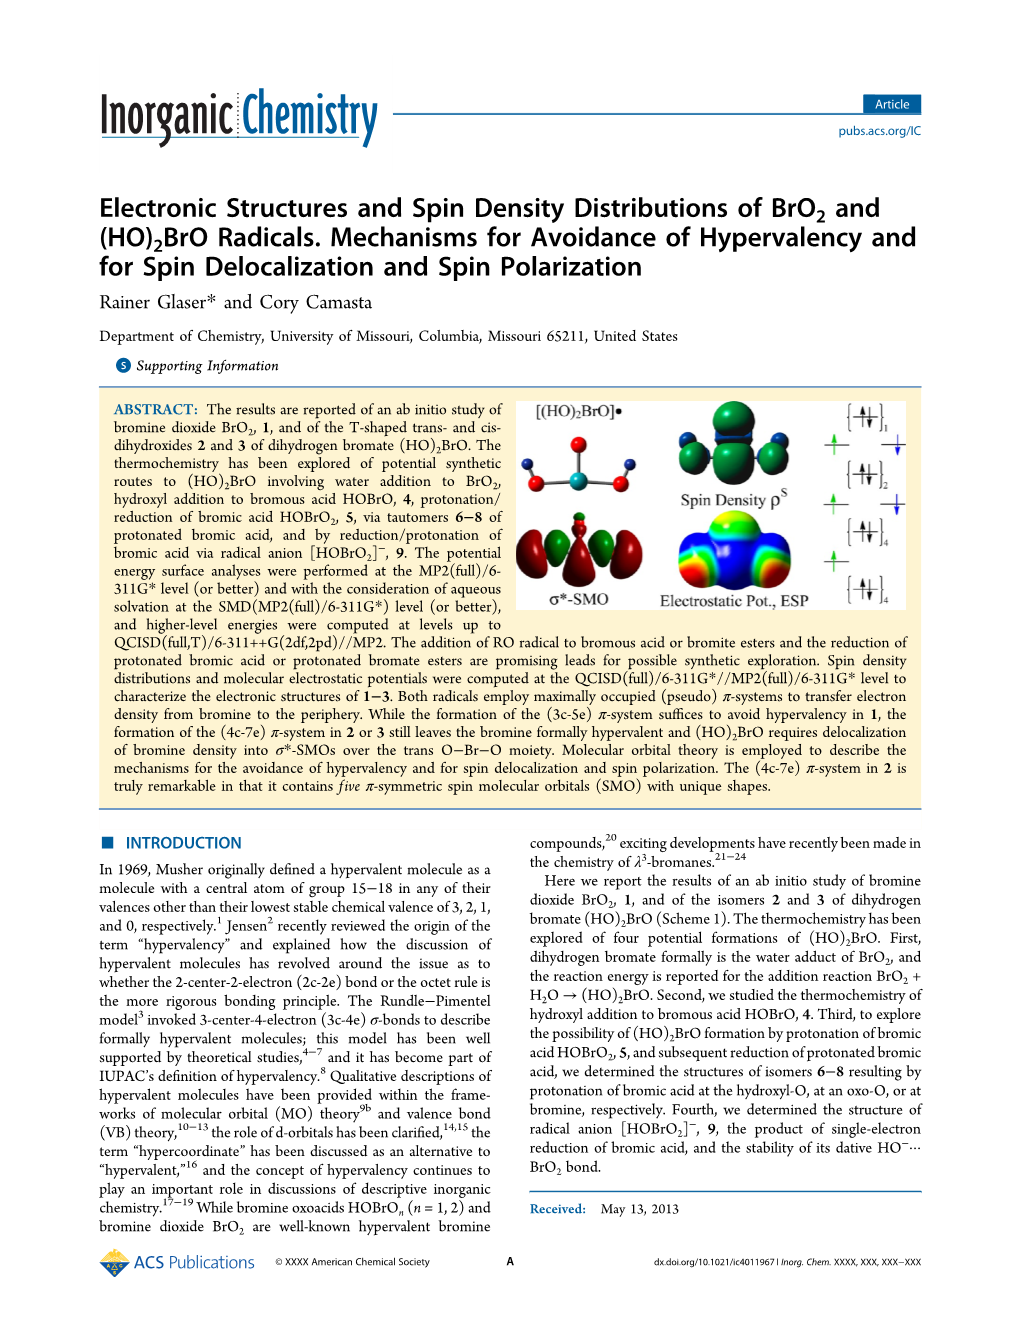 Electronic Structures and Spin Density Distributions of Bro2 and (HO)2Bro Radicals